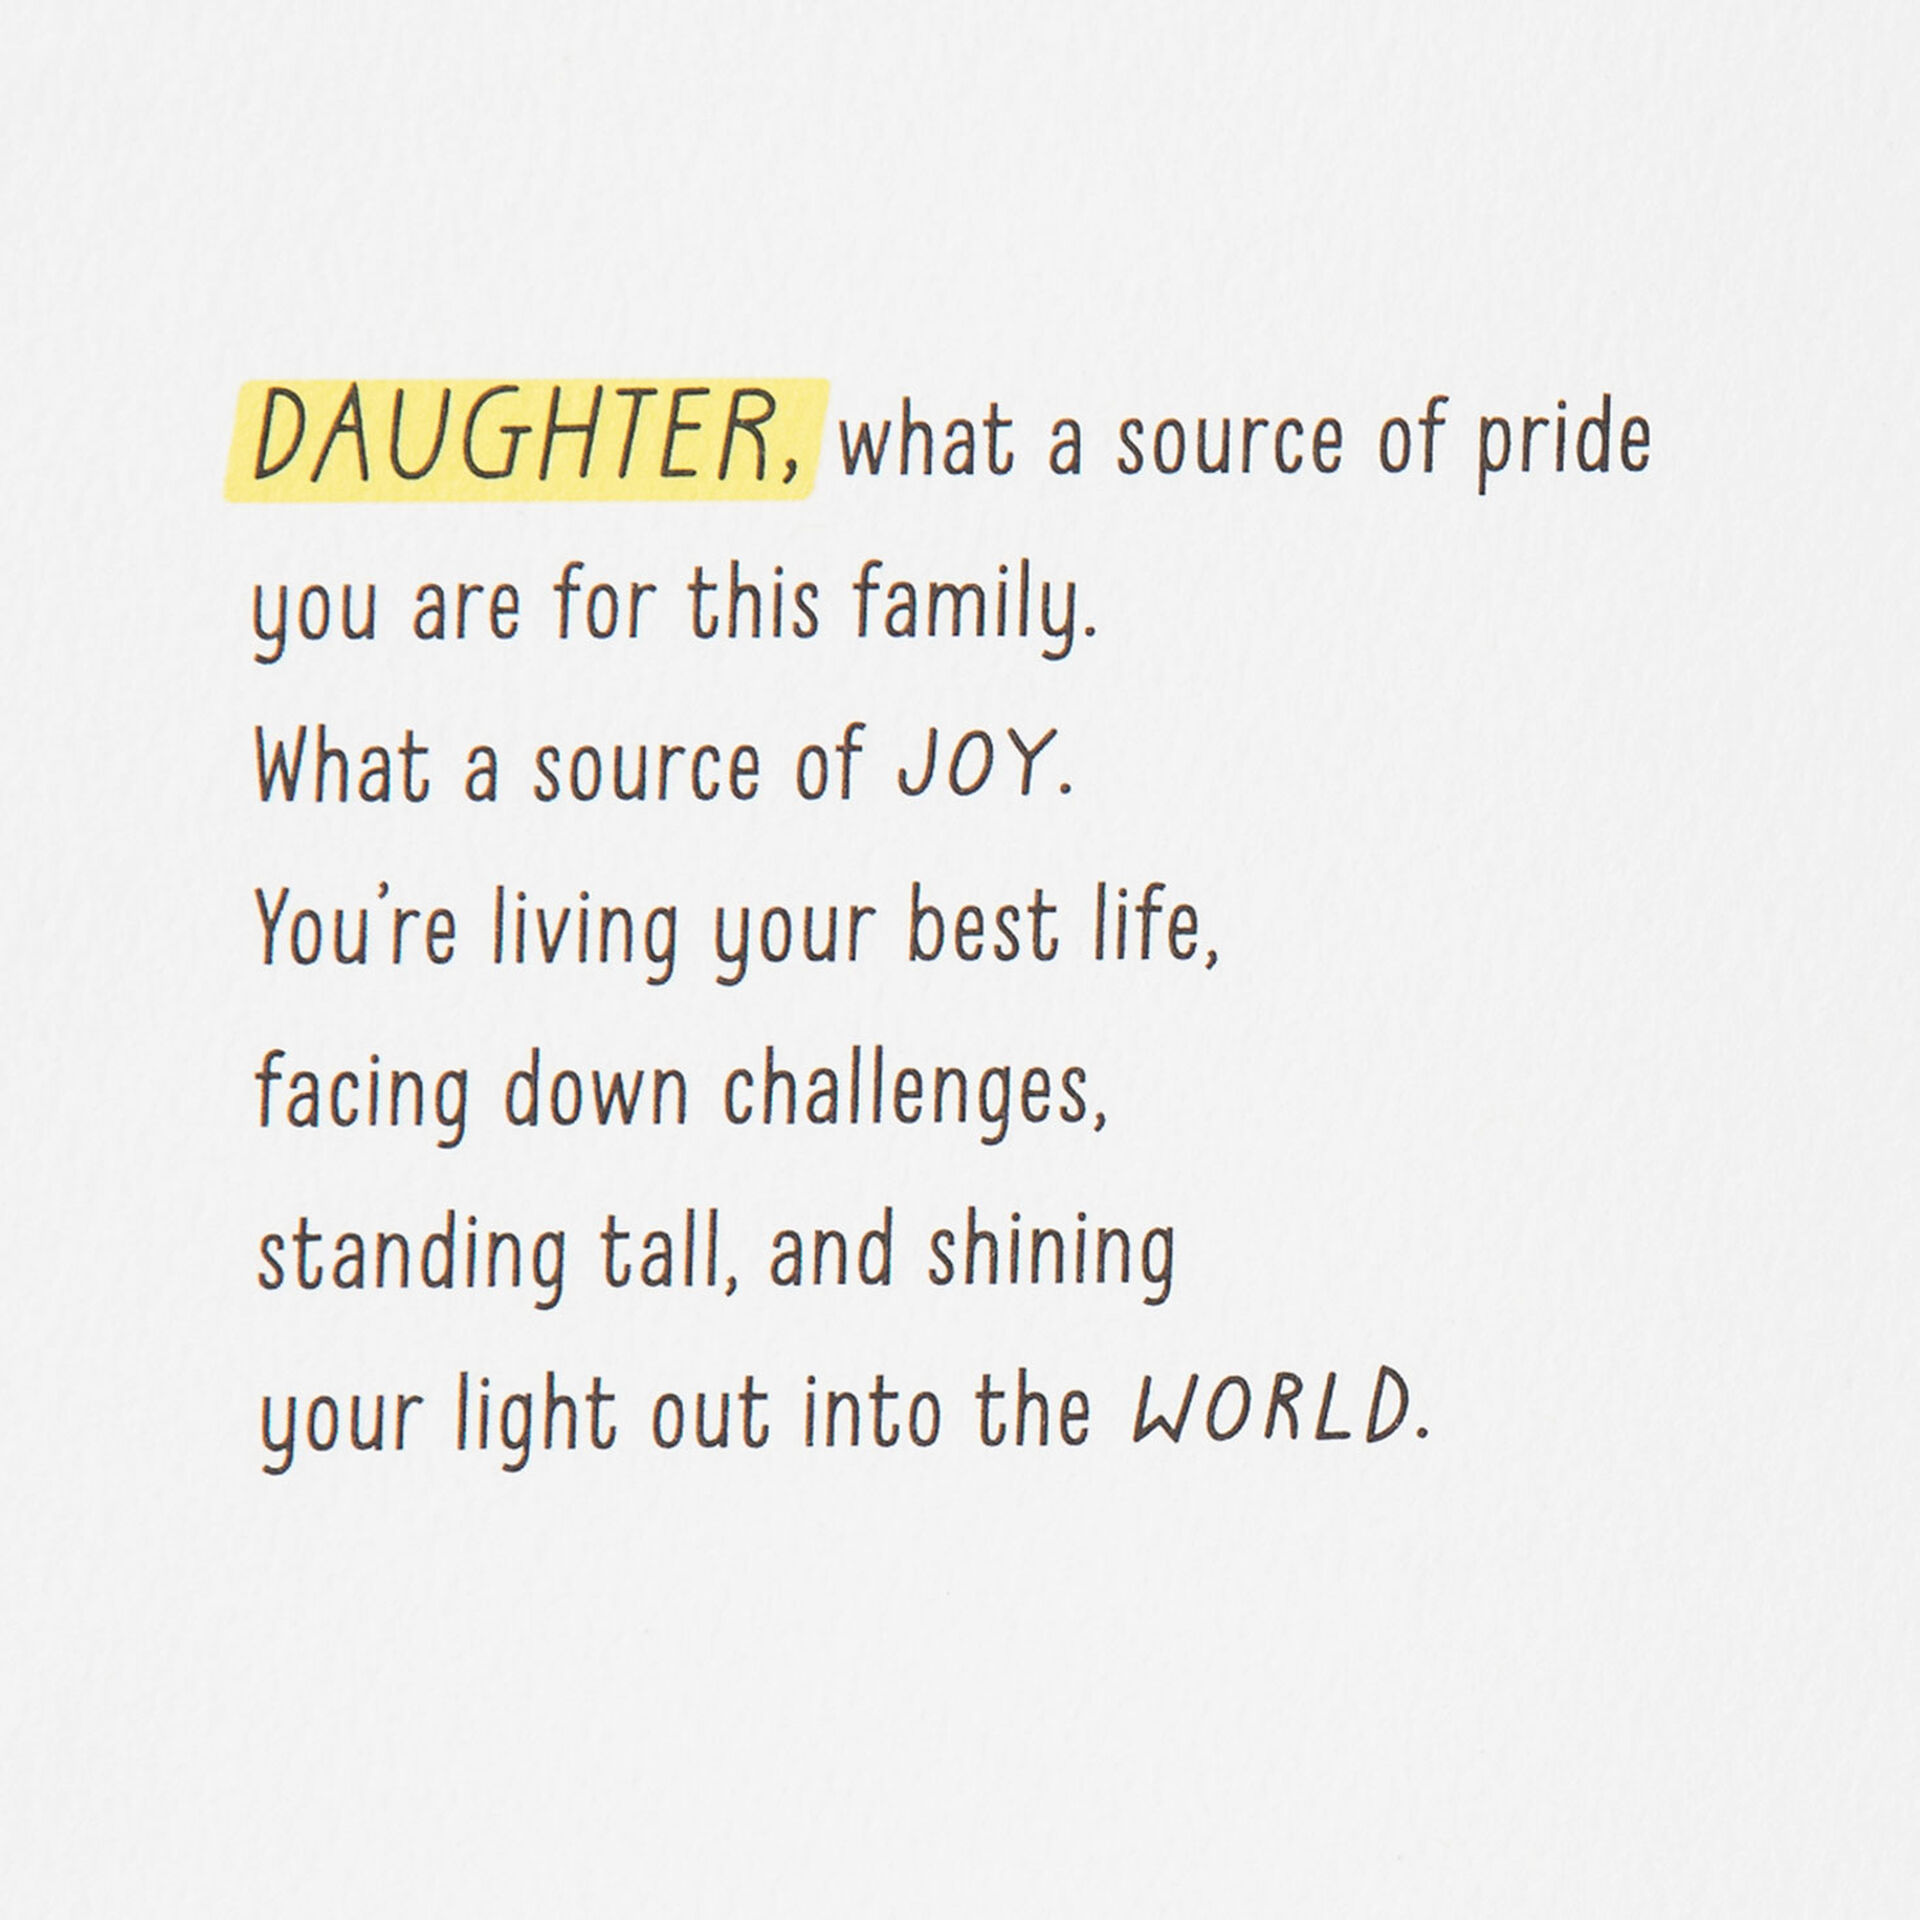 Love-the-Way-You-Shine-Birthday-Card-for-Daughter_529FBD6013_02